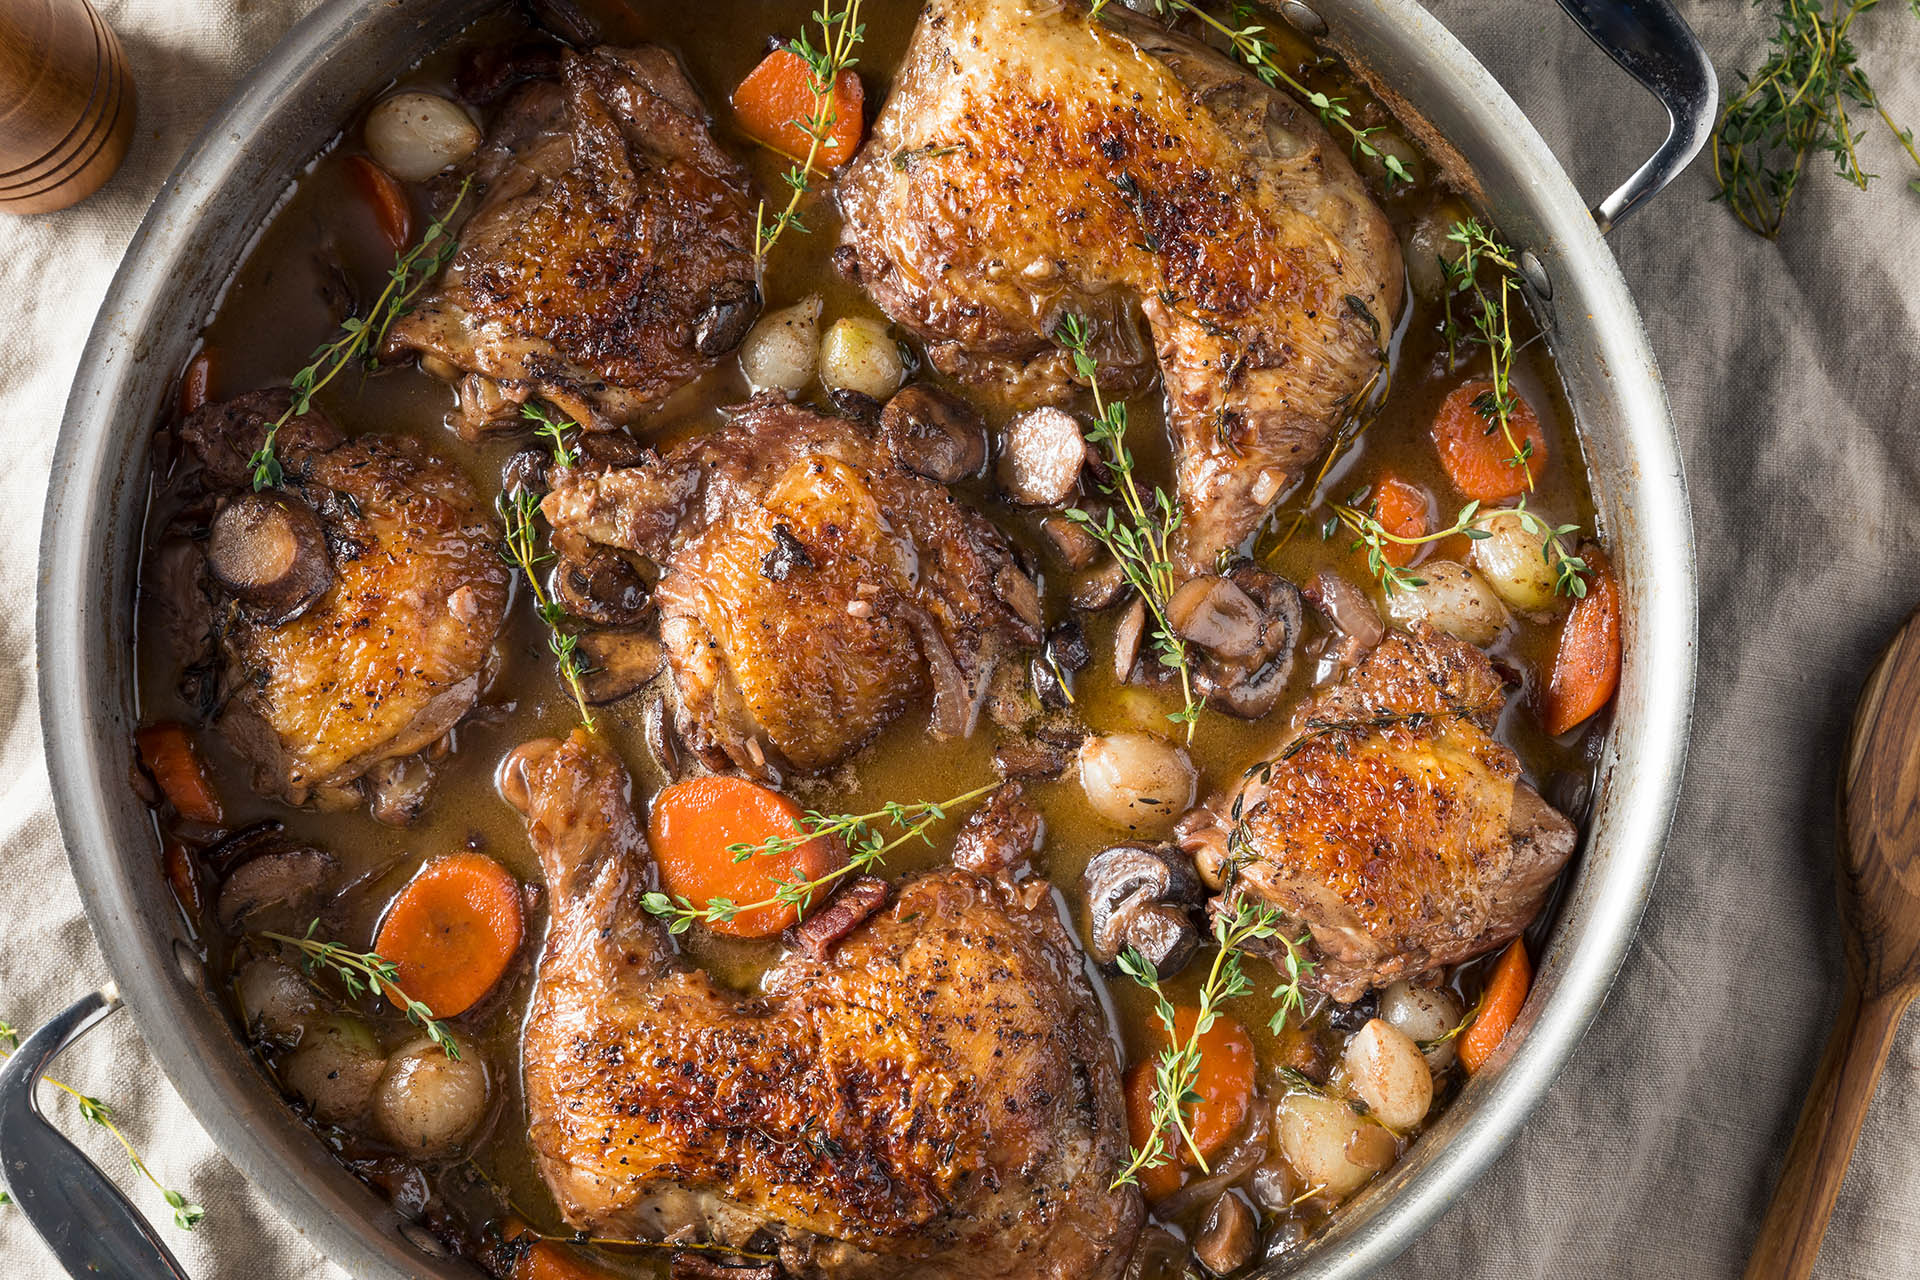 Coq au Vin at Broom Hill Manor Self catering cottages